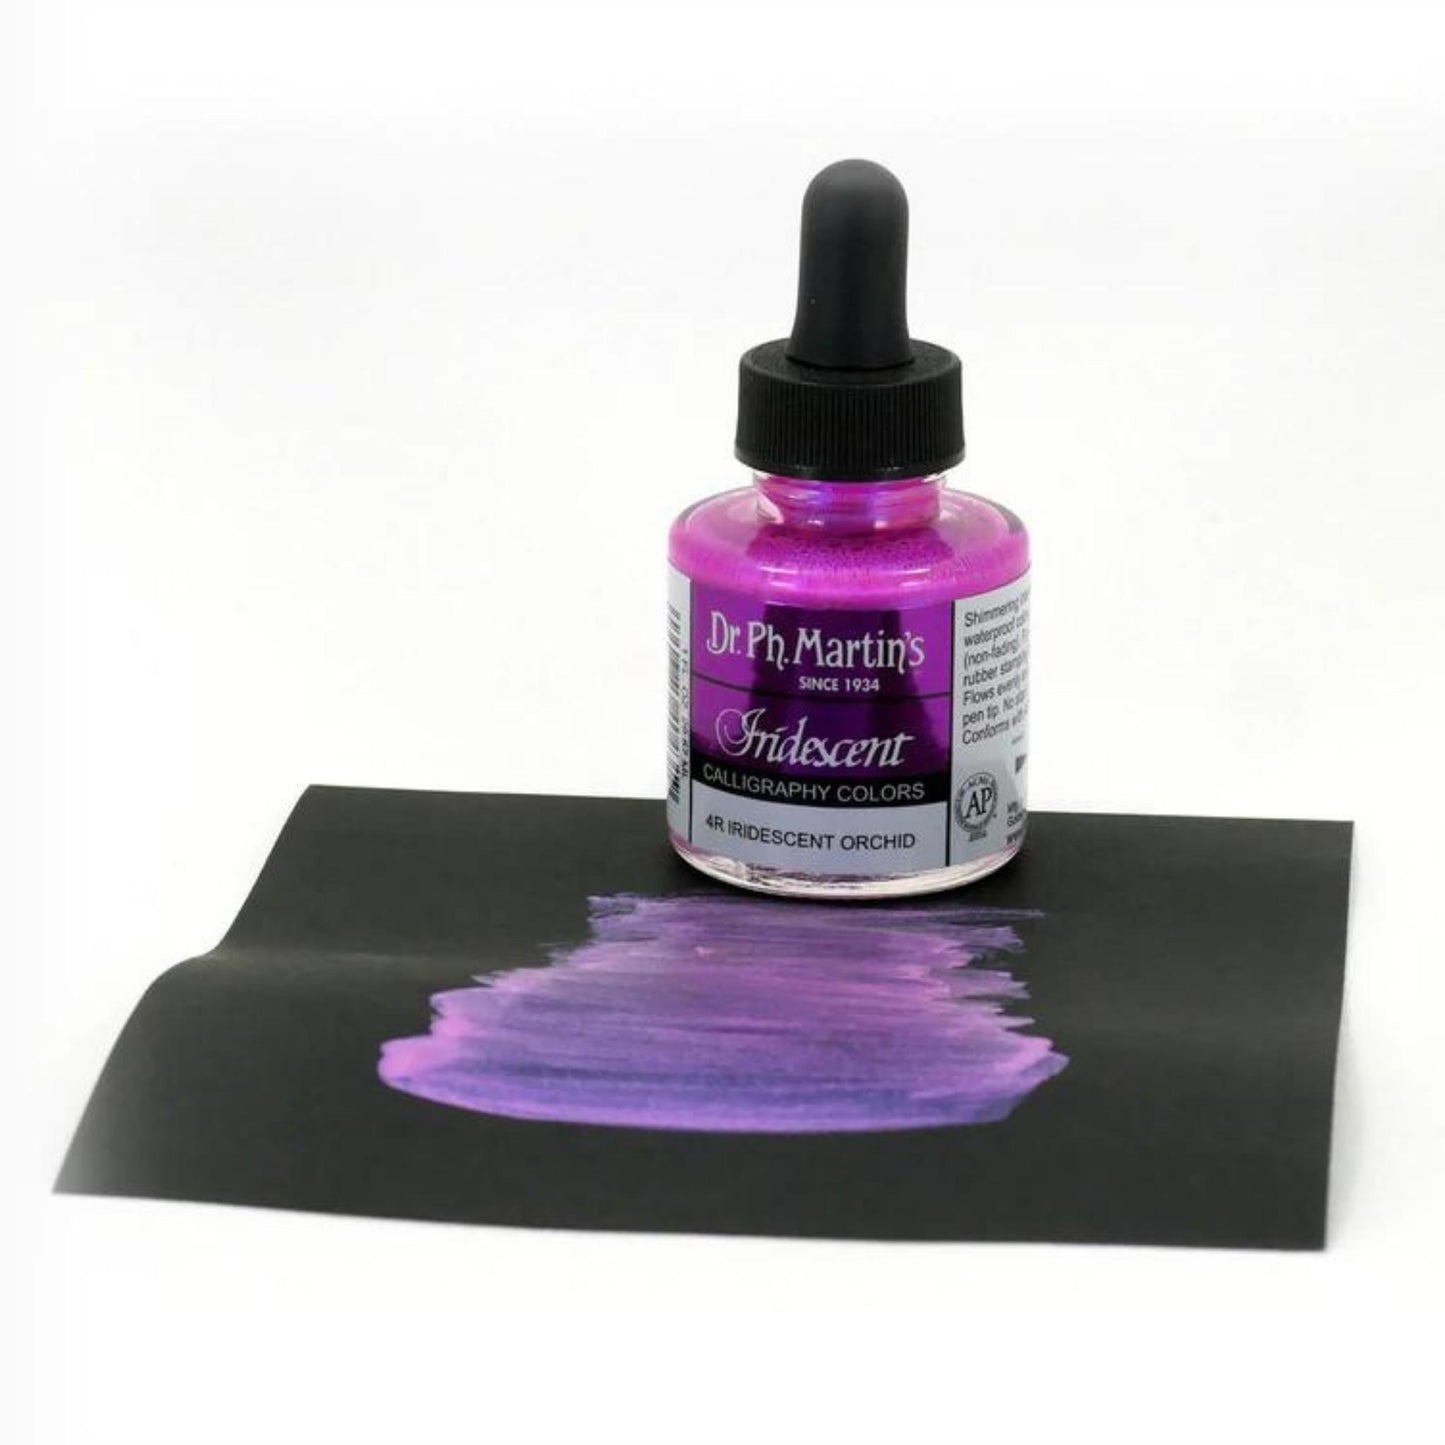 Dr.Ph.Martins - Iridescent Calligraphy: 4R Iridescent Orchid